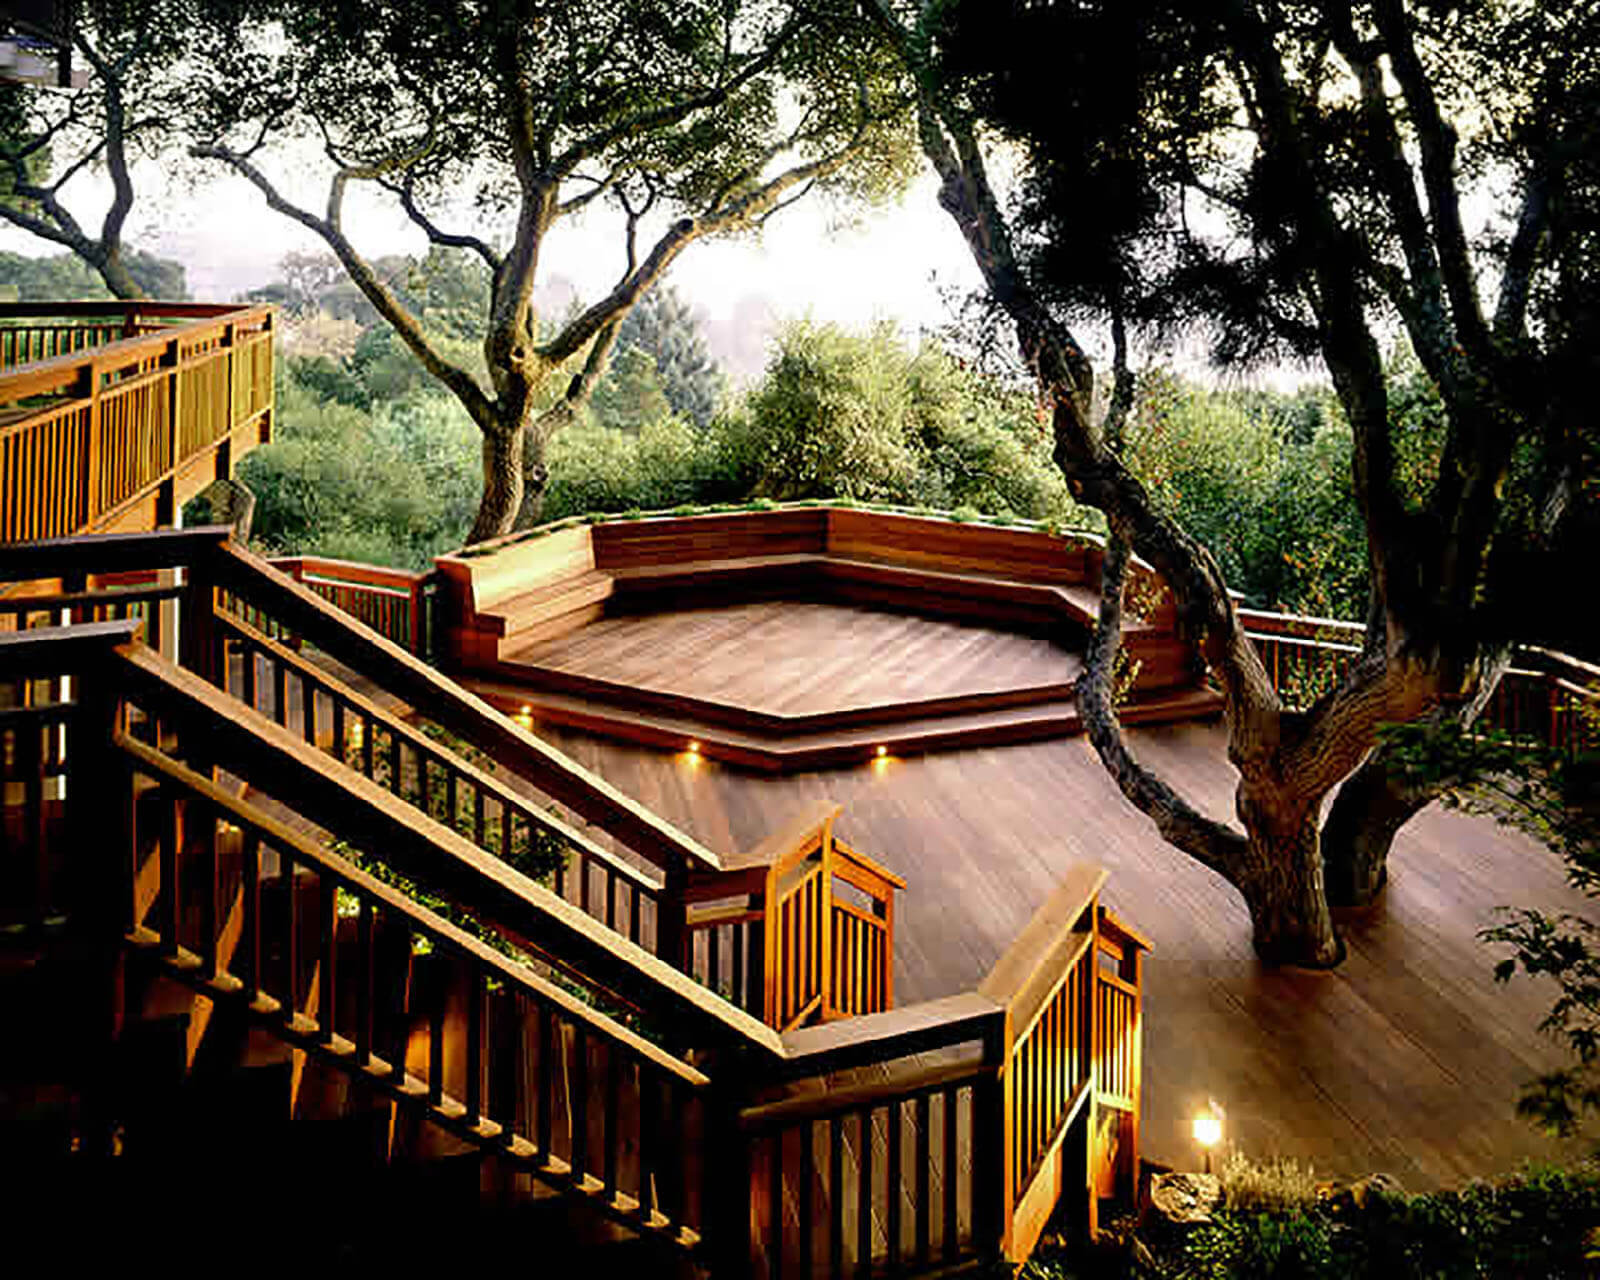 Lavish wrap-around deck with wooden stairs leading to lower wooden deck, with a tree coming through the deck. Gorgeous